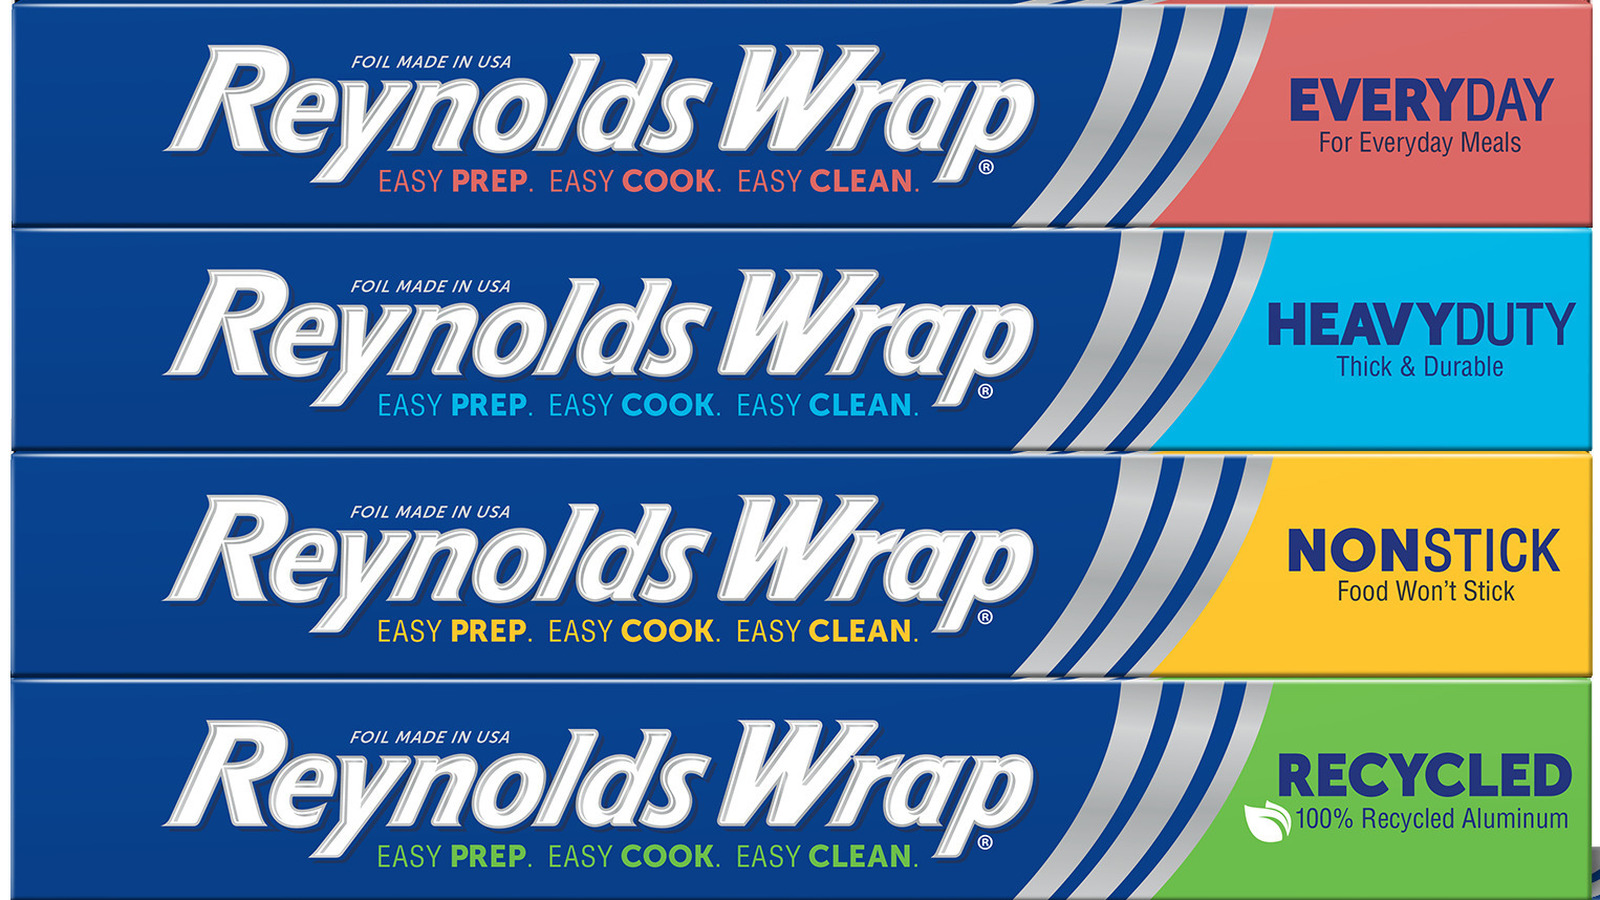 https://www.mashed.com/img/gallery/what-the-reynolds-wrap-aluminum-foil-box-colors-mean/l-intro-1623770752.jpg